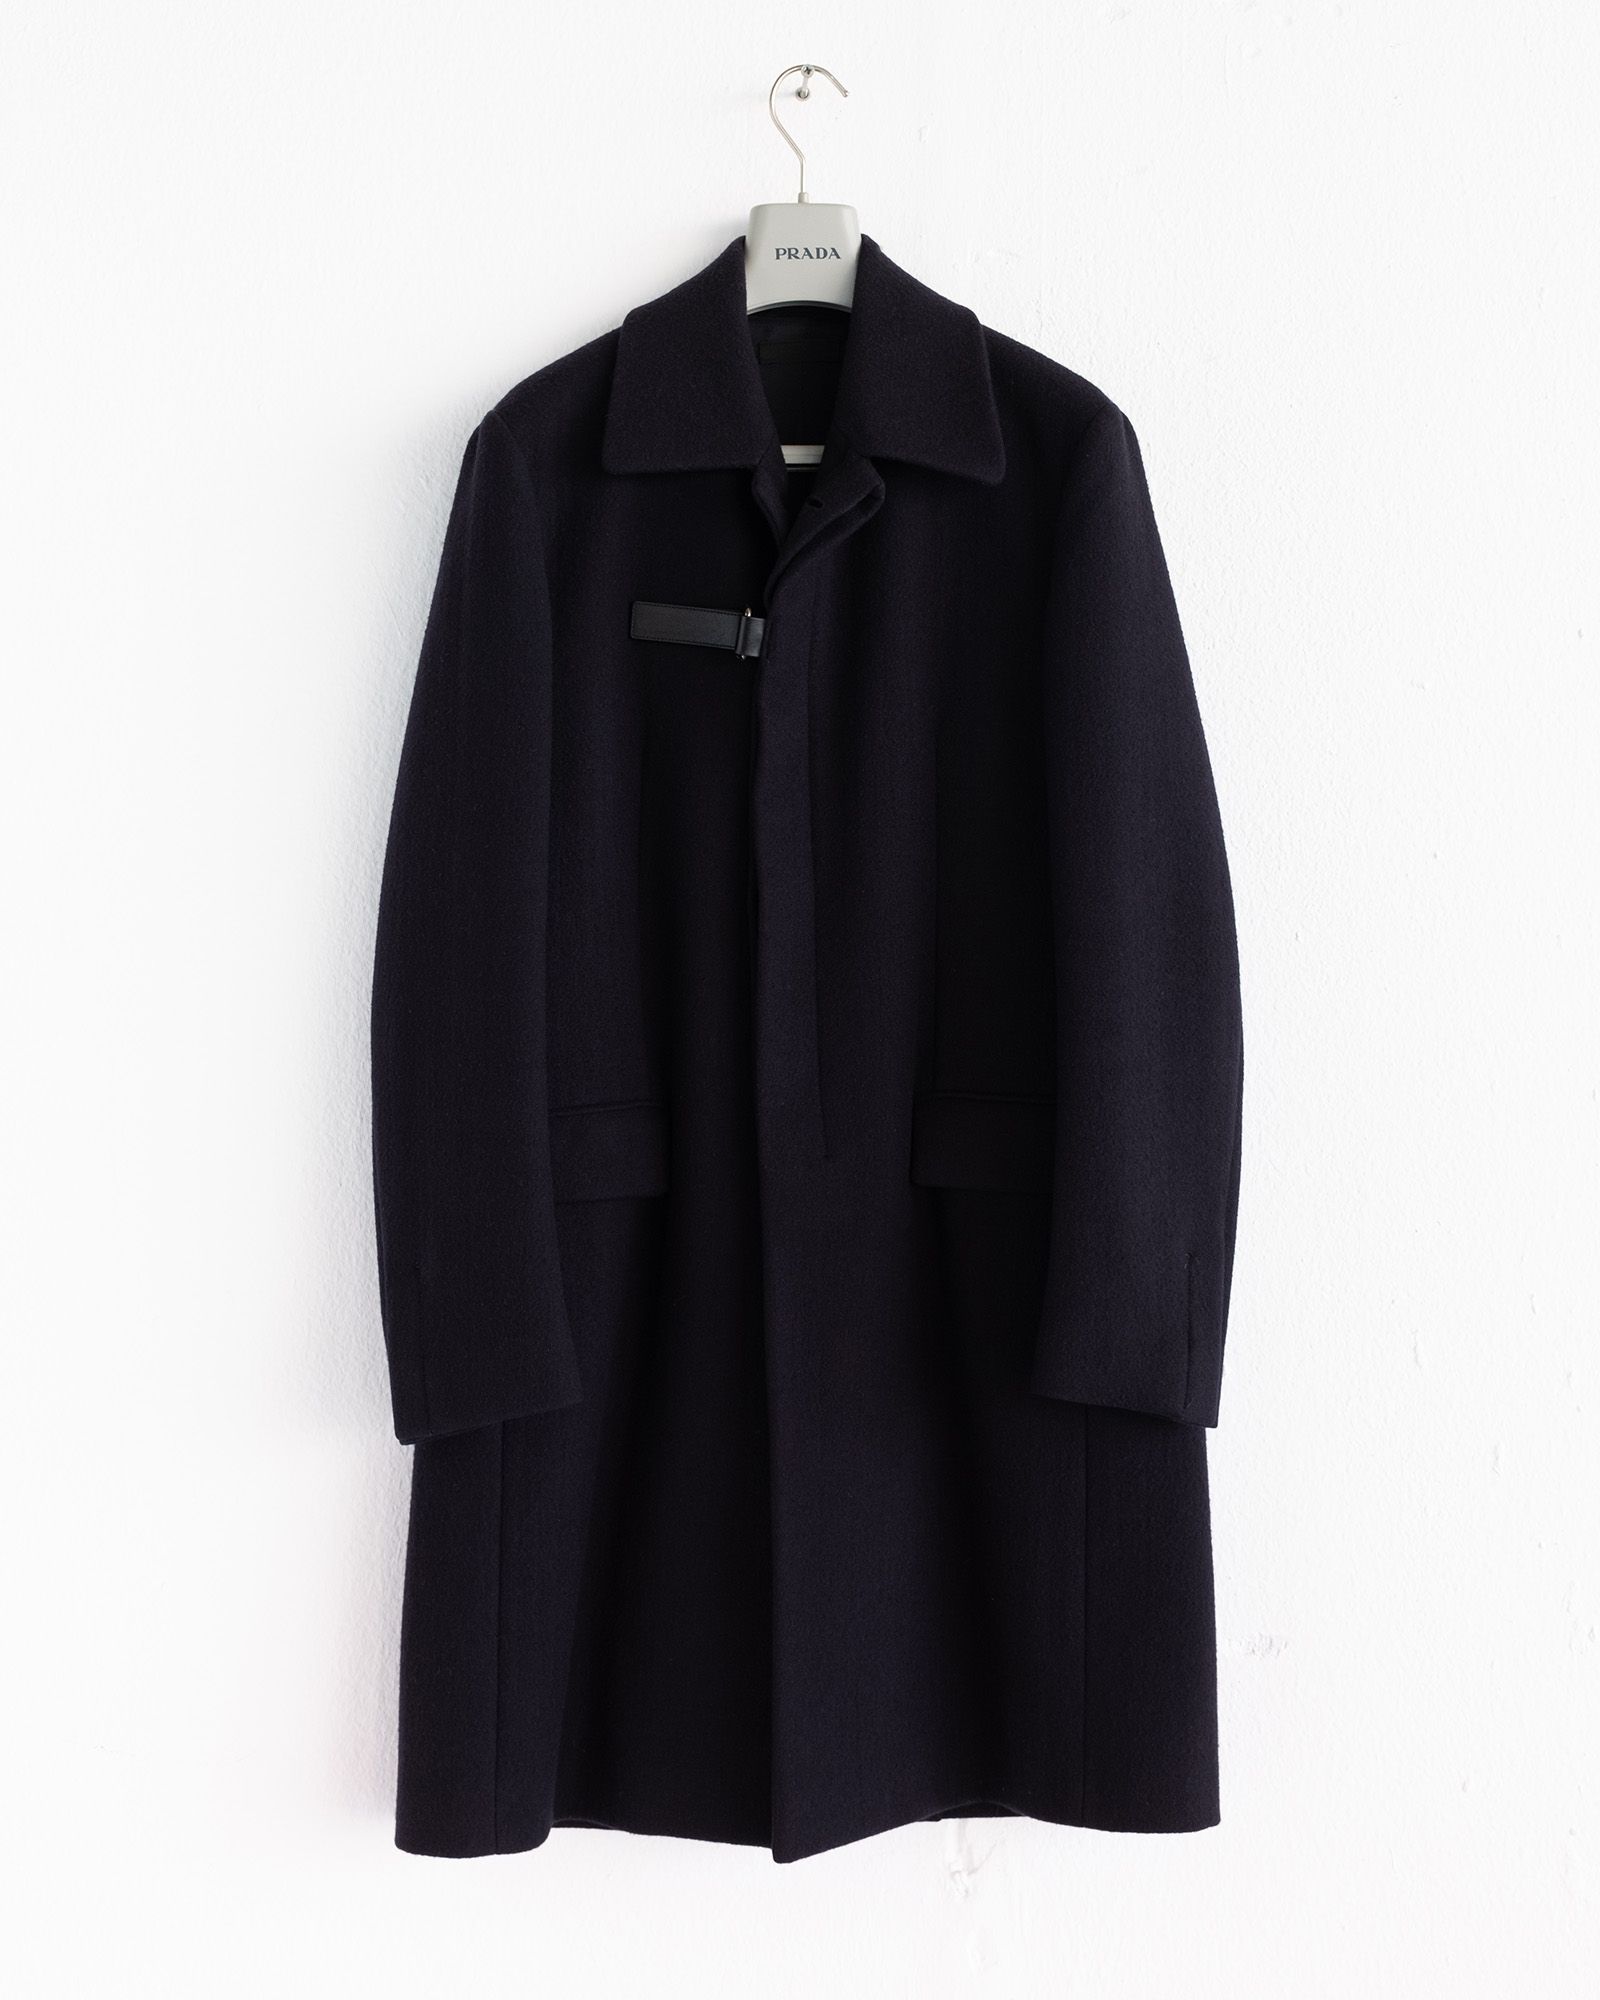 Pre-owned Prada Aw 99 Wool Overcoat With Leather Strap Closure In Black